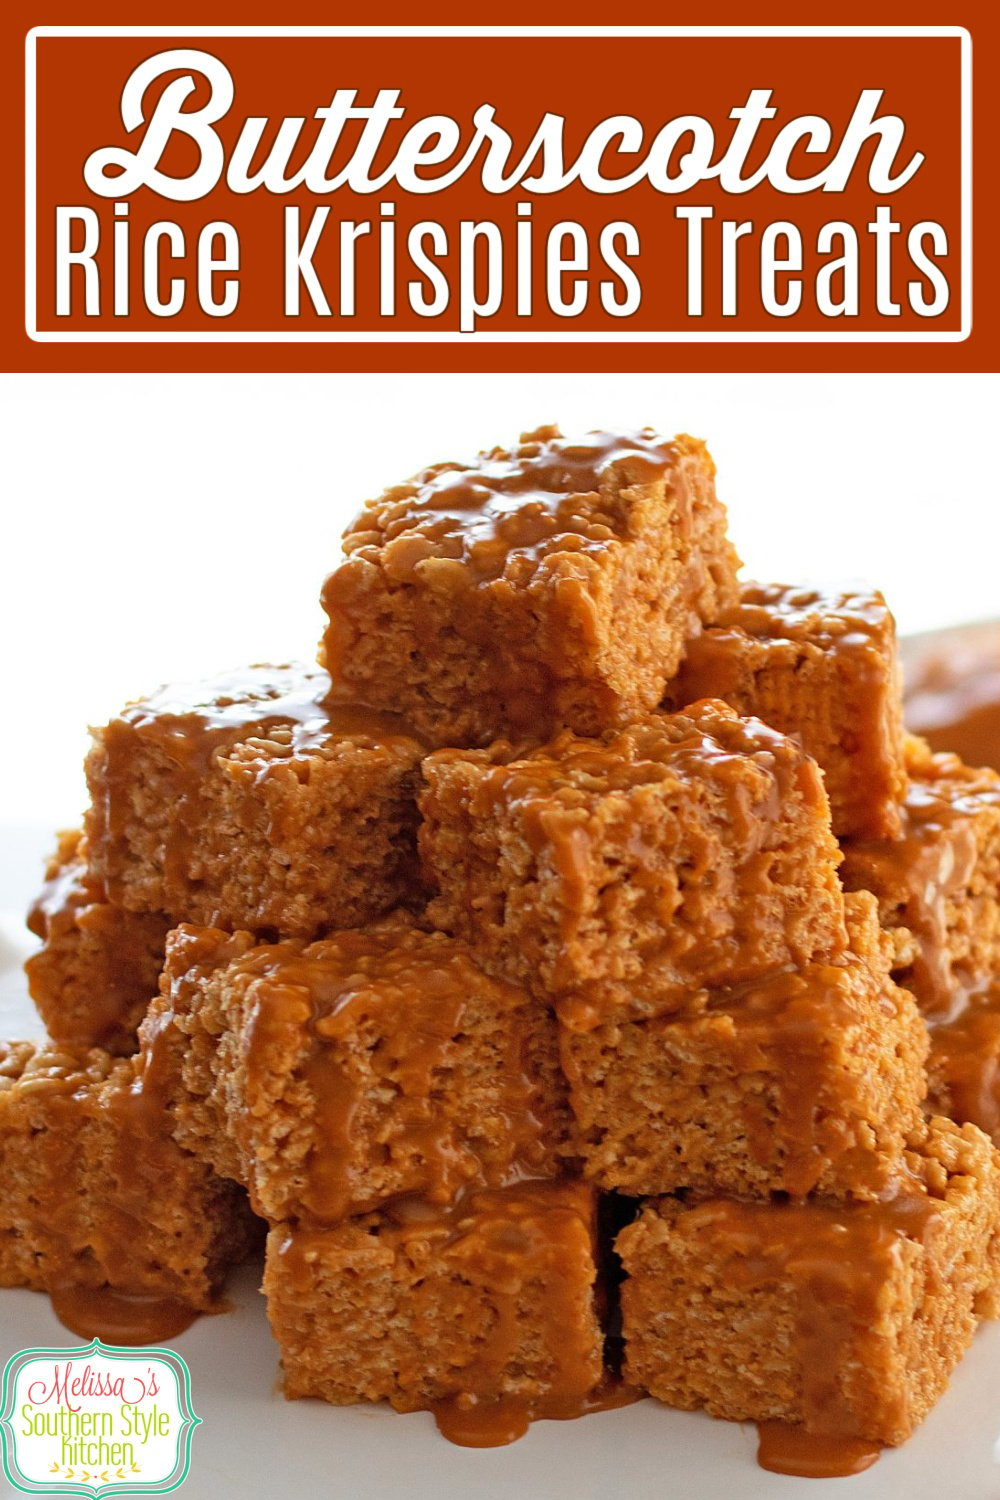 These rich and buttery glazed Butterscotch Rice Krispies Treats are no-bake making them ideal for cook's of all skill levels to master #ricekrispiestreats #butterscotchricekrispiestreats #butterscotchbars #nobakedesserts #dessertrecipes via @melissasssk